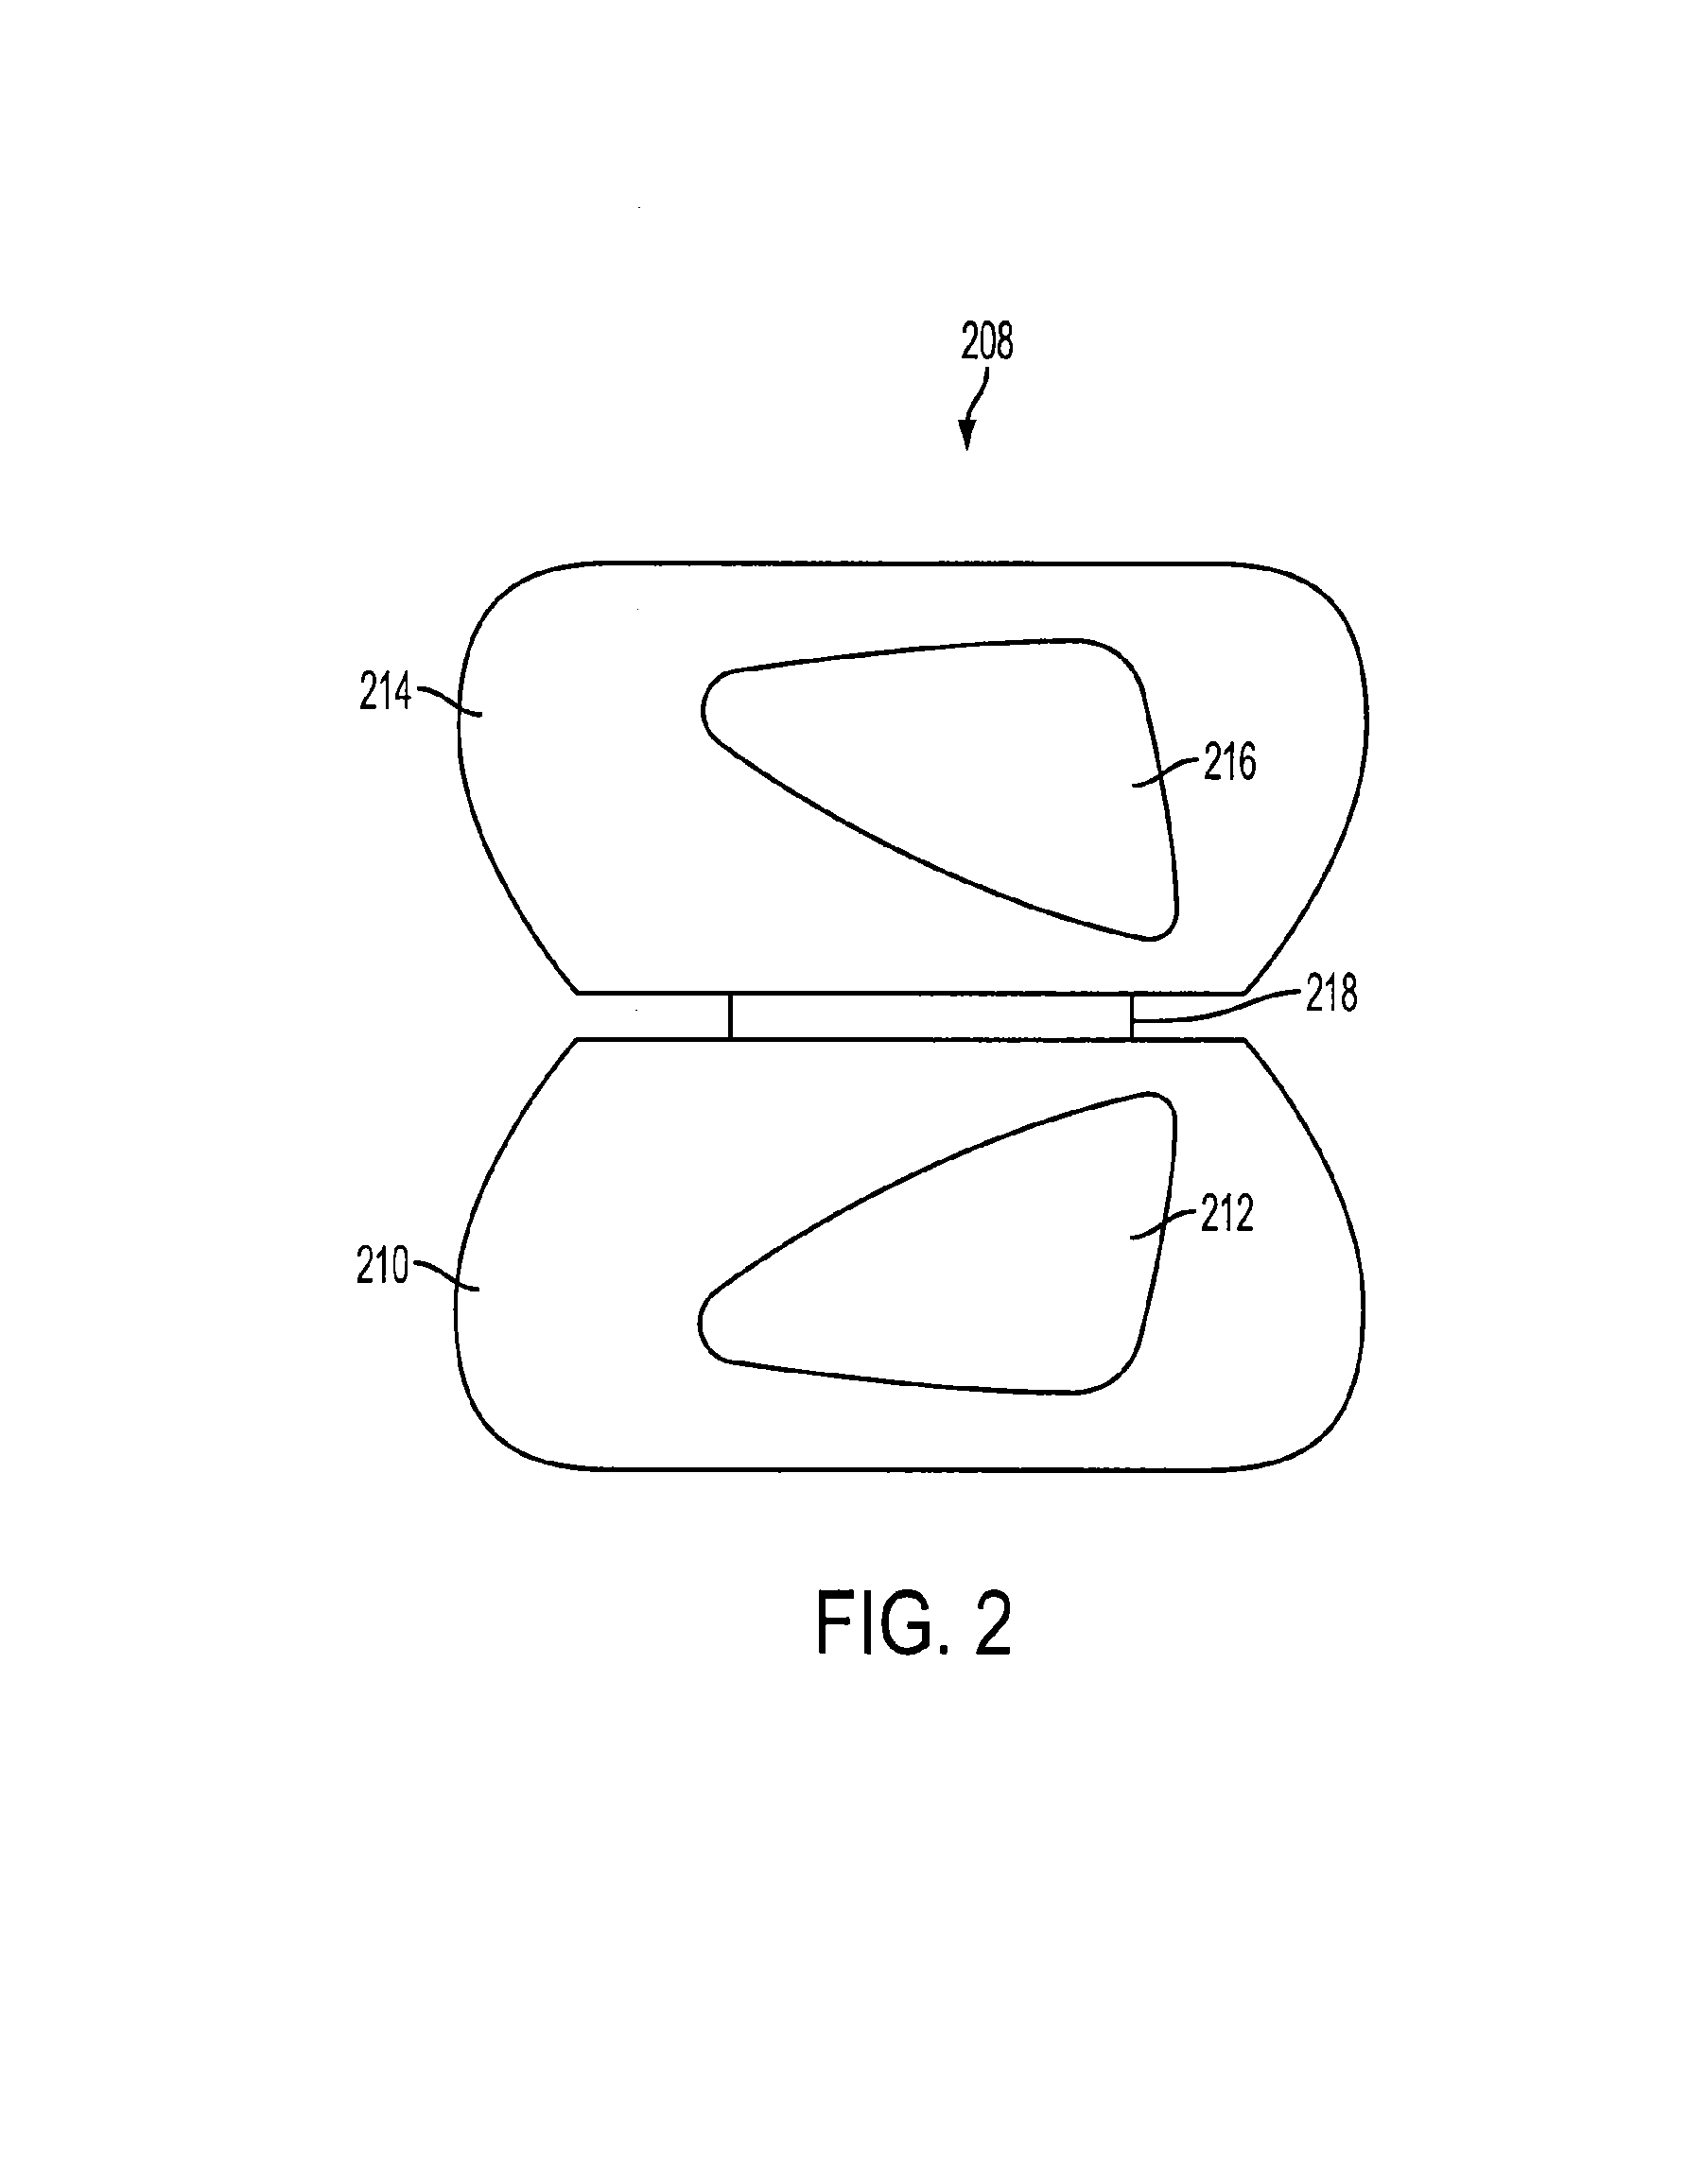 Method for manufacturing formed lumps of meat